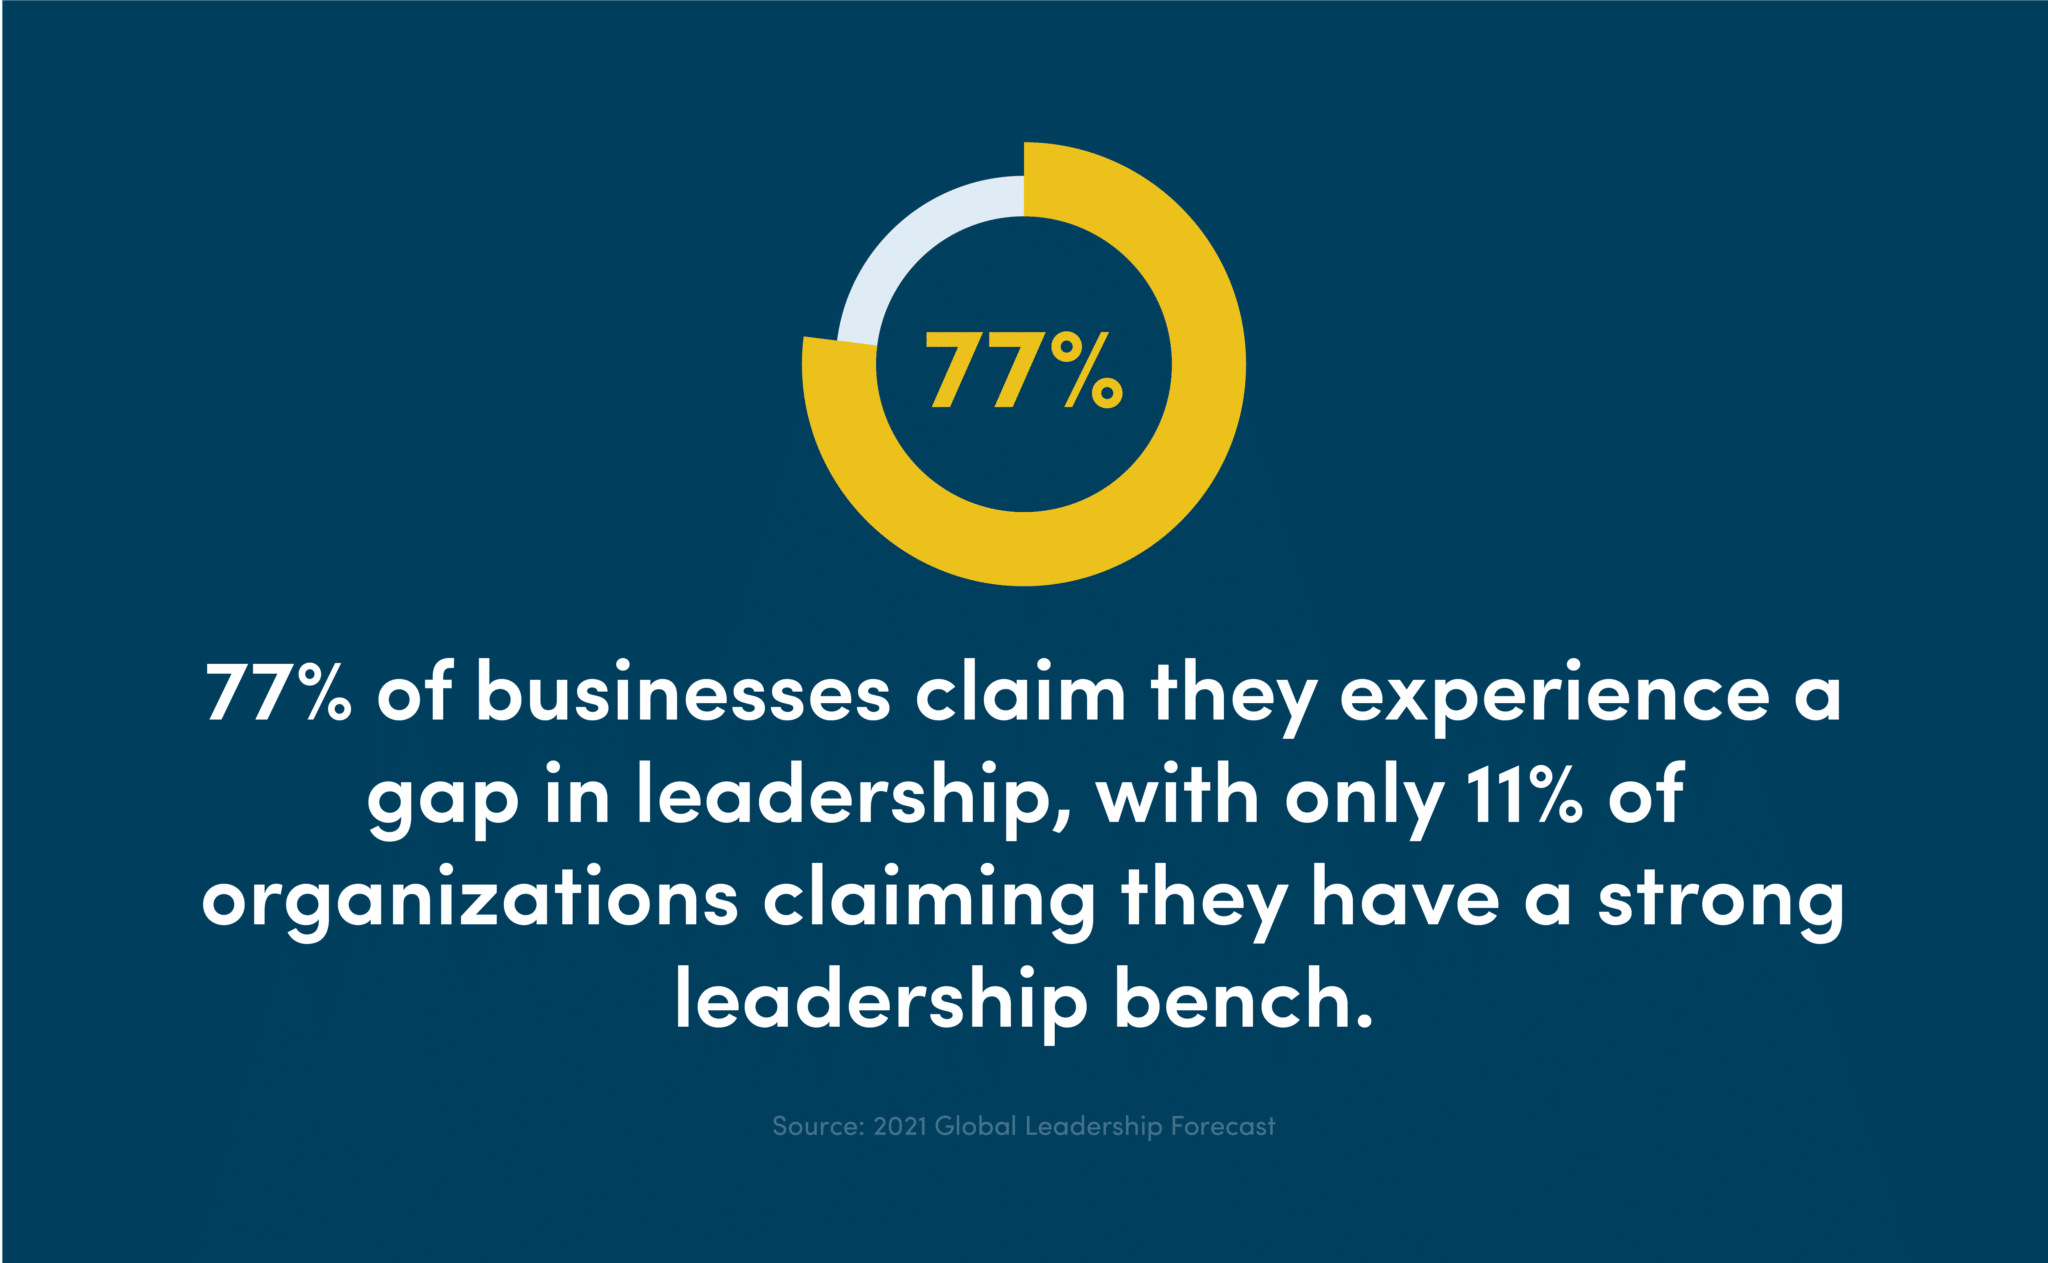 77% of businesses claim they experience a gap in leadership, with only 11% of organizations claiming they have a strong leadership bench